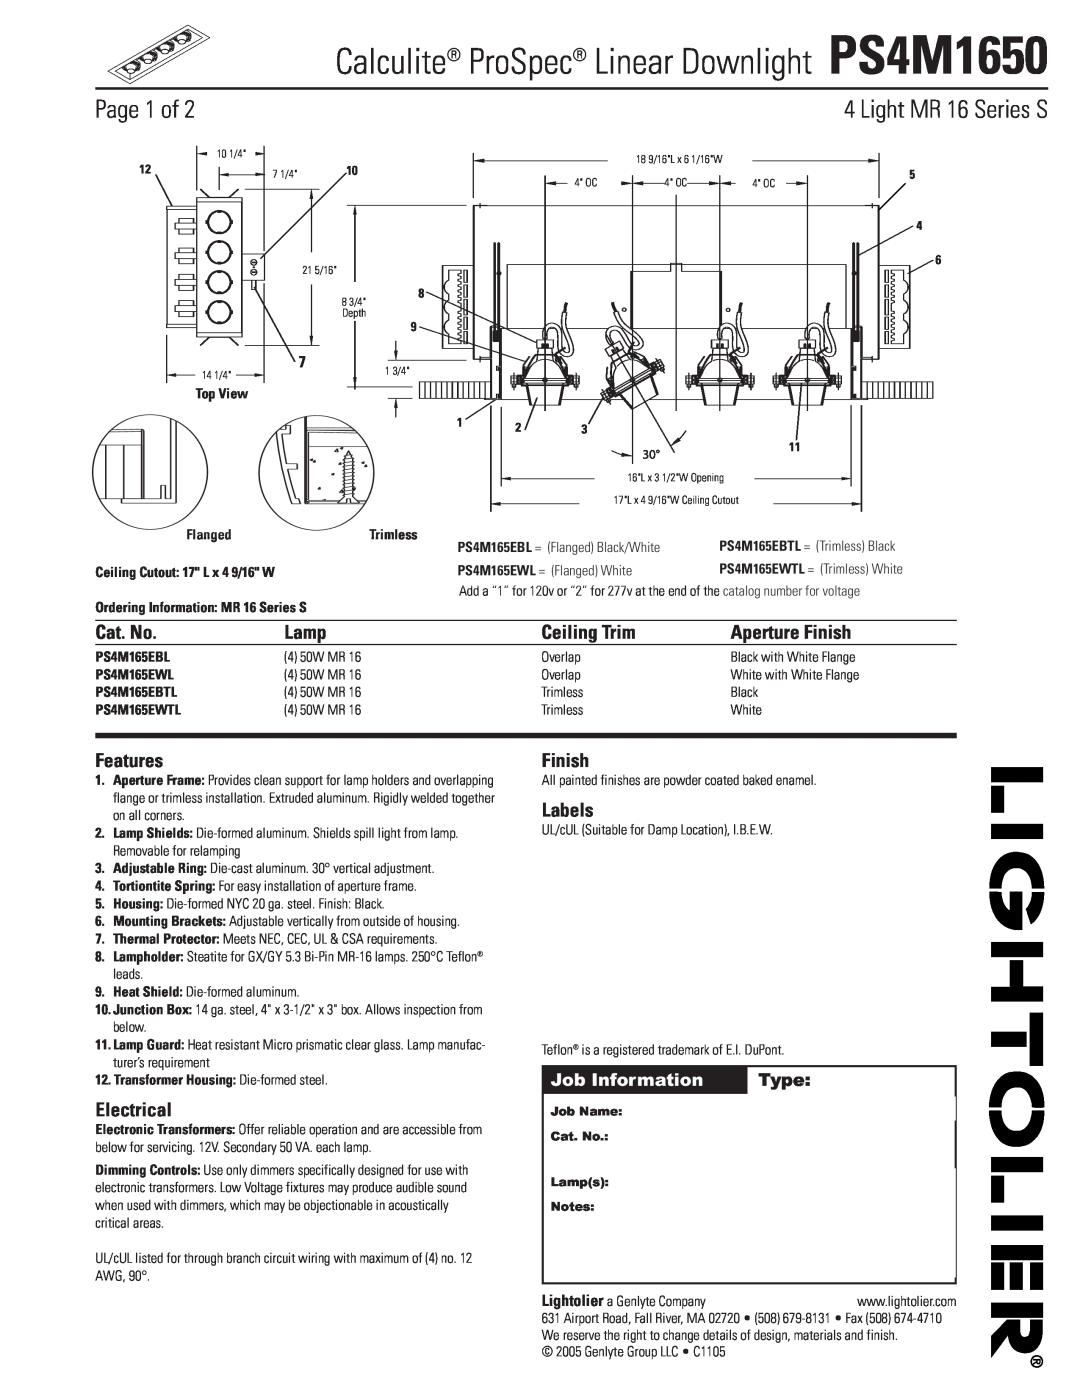 Lightolier PS4M1650 manual Page 1 of, Light MR 16 Series S, Cat. No, Lamp, Ceiling Trim, Aperture Finish, Features, Labels 